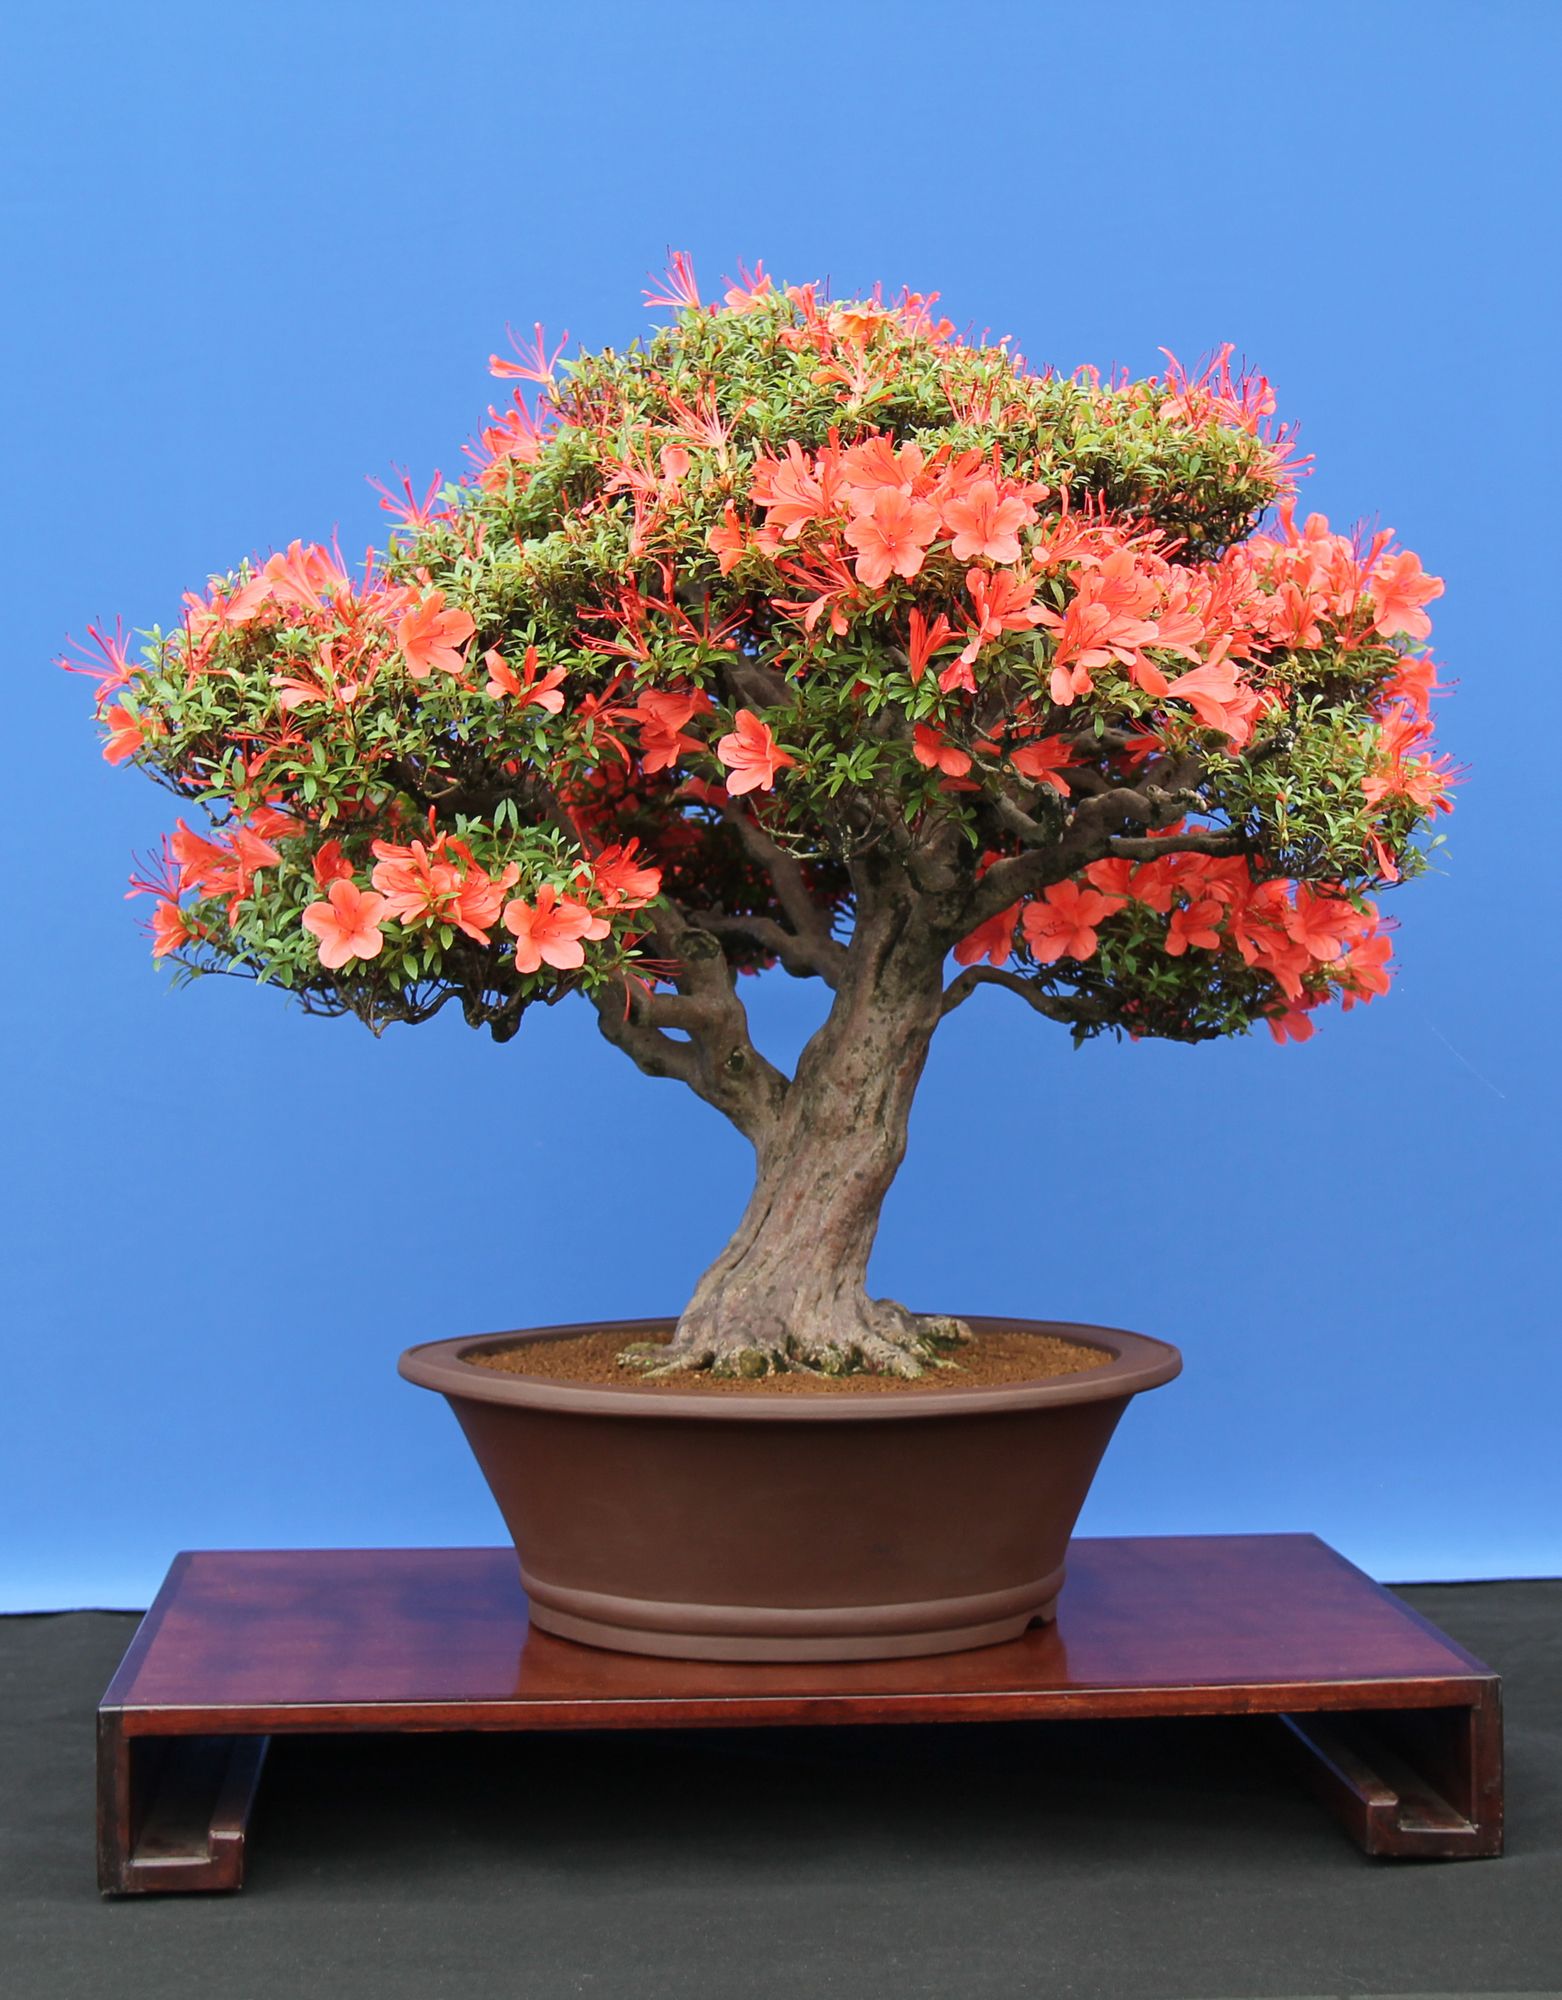 Bonsai tree planted in a modern rounded pot situated in a solid platform blooming in orange flowers